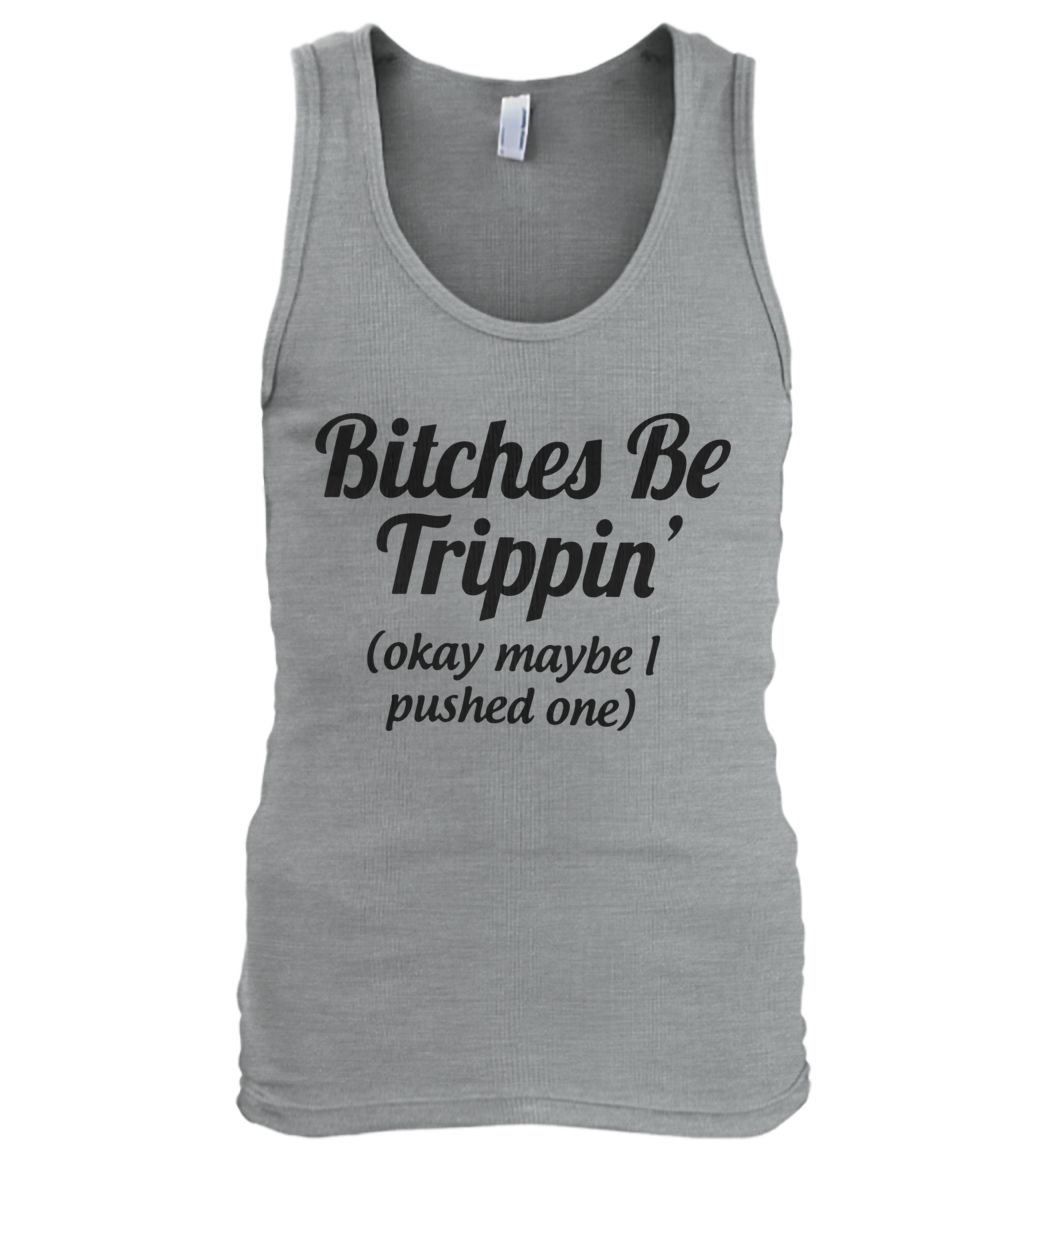 Bitches be trippin'ok maybe I pushed one men's tank top